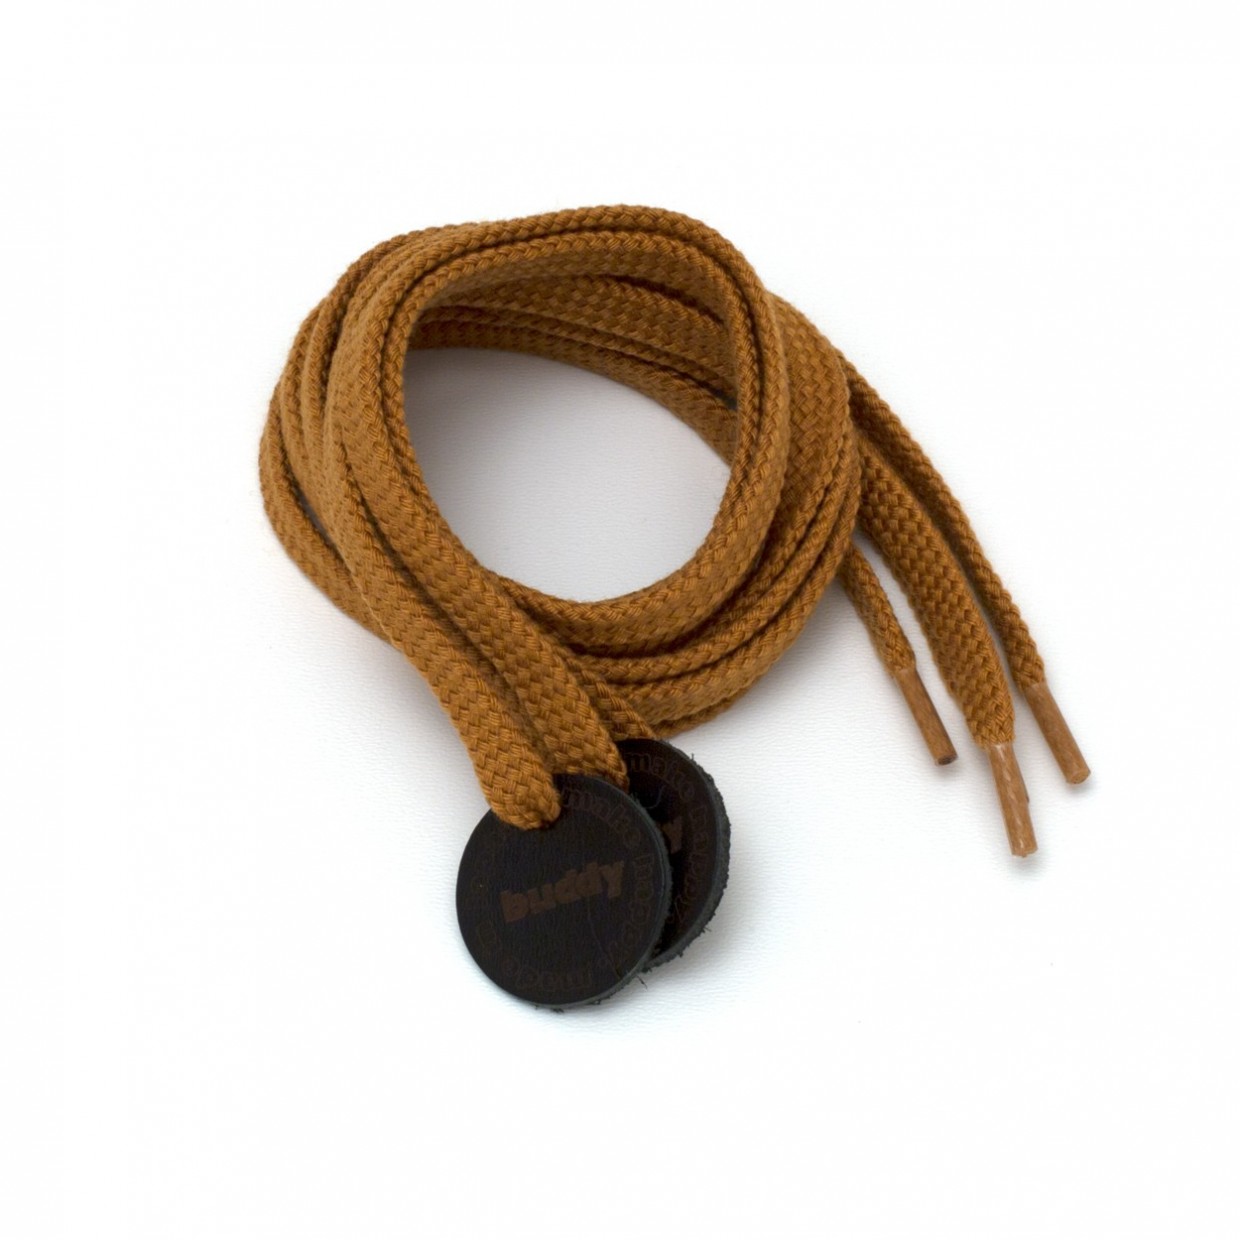 Shoelaces Camel with Leather patch 130 cm : 51"